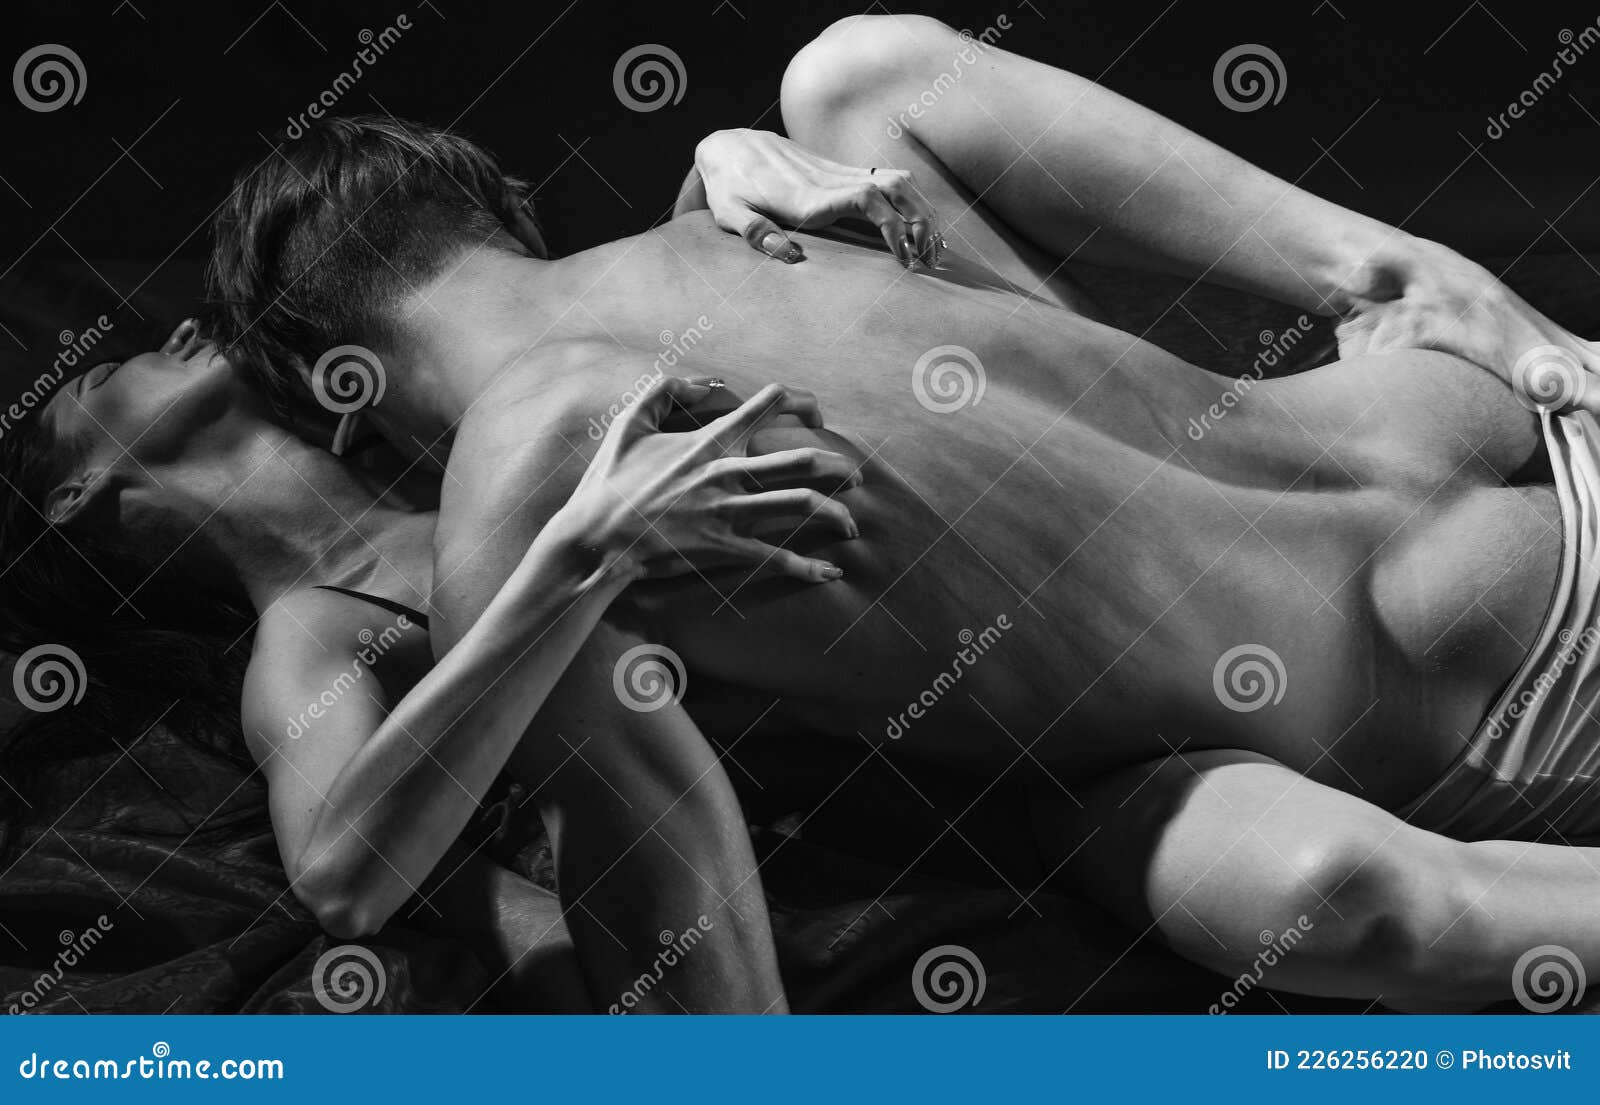 Sensual Couple in Love of Girlfriend and Boyfriend Lovers Having Sex Foreplay with Undressed Body, Passion Stock Photo picture